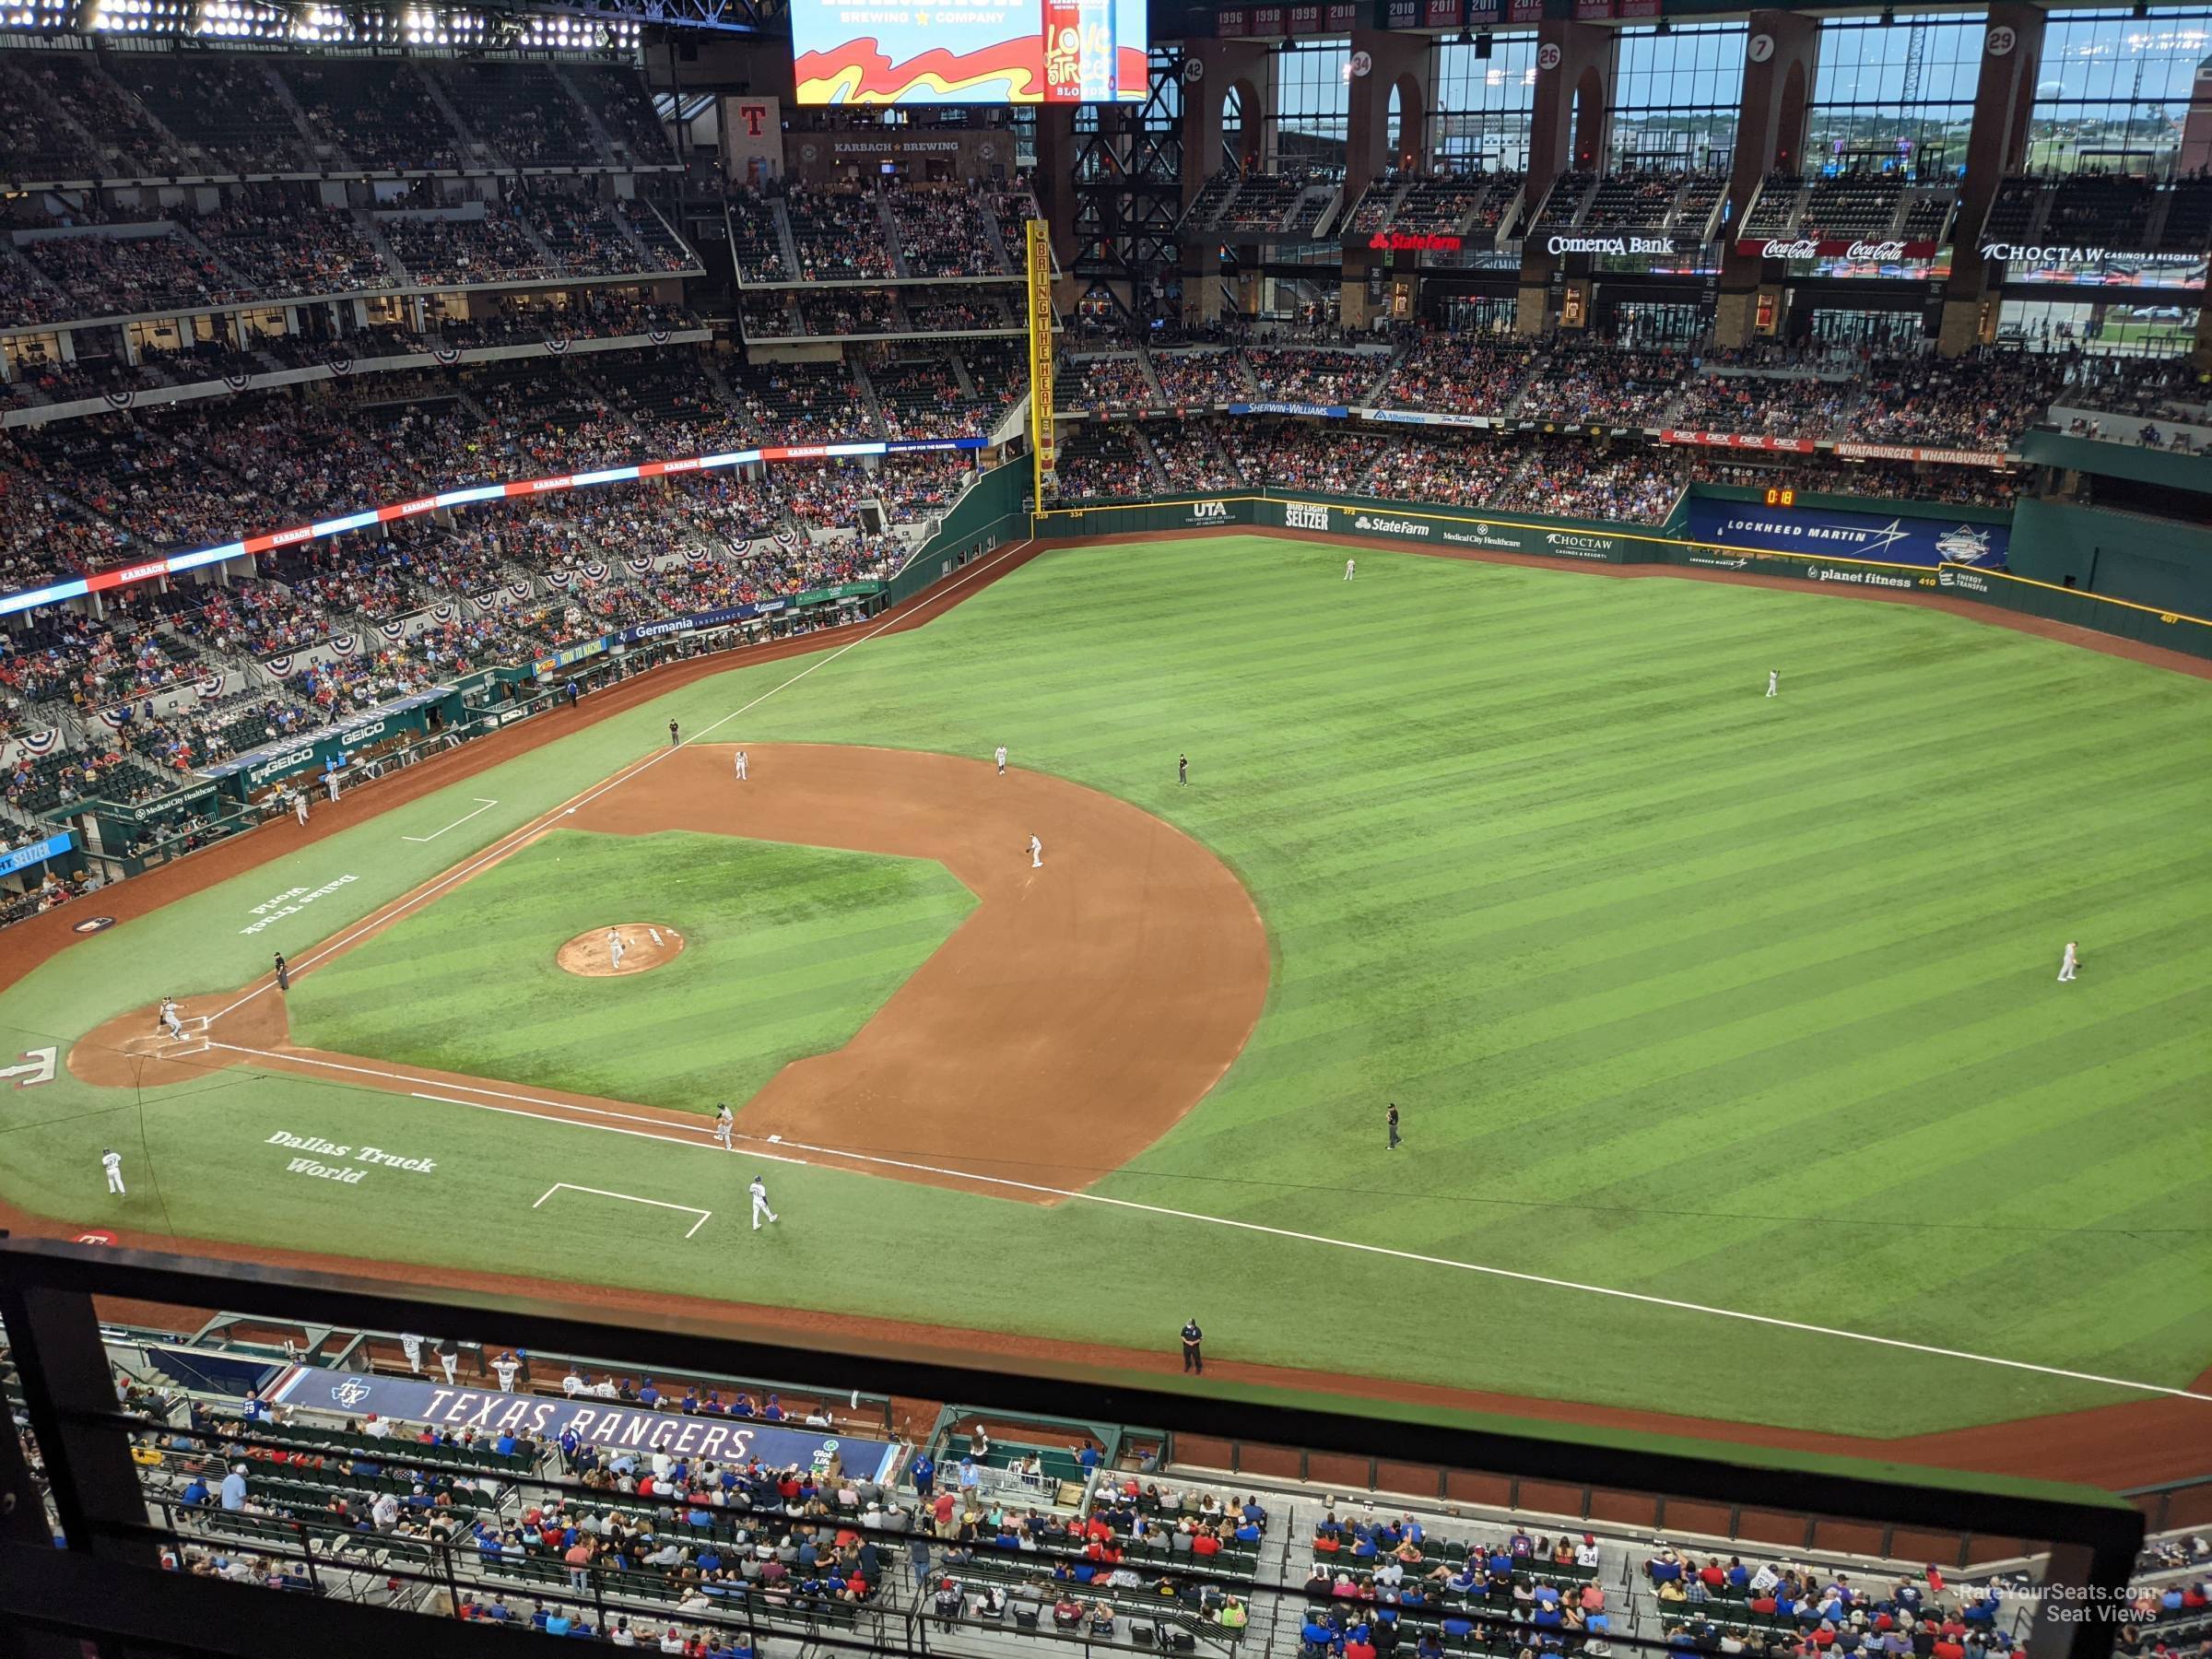 Section 314 at Globe Life Field 